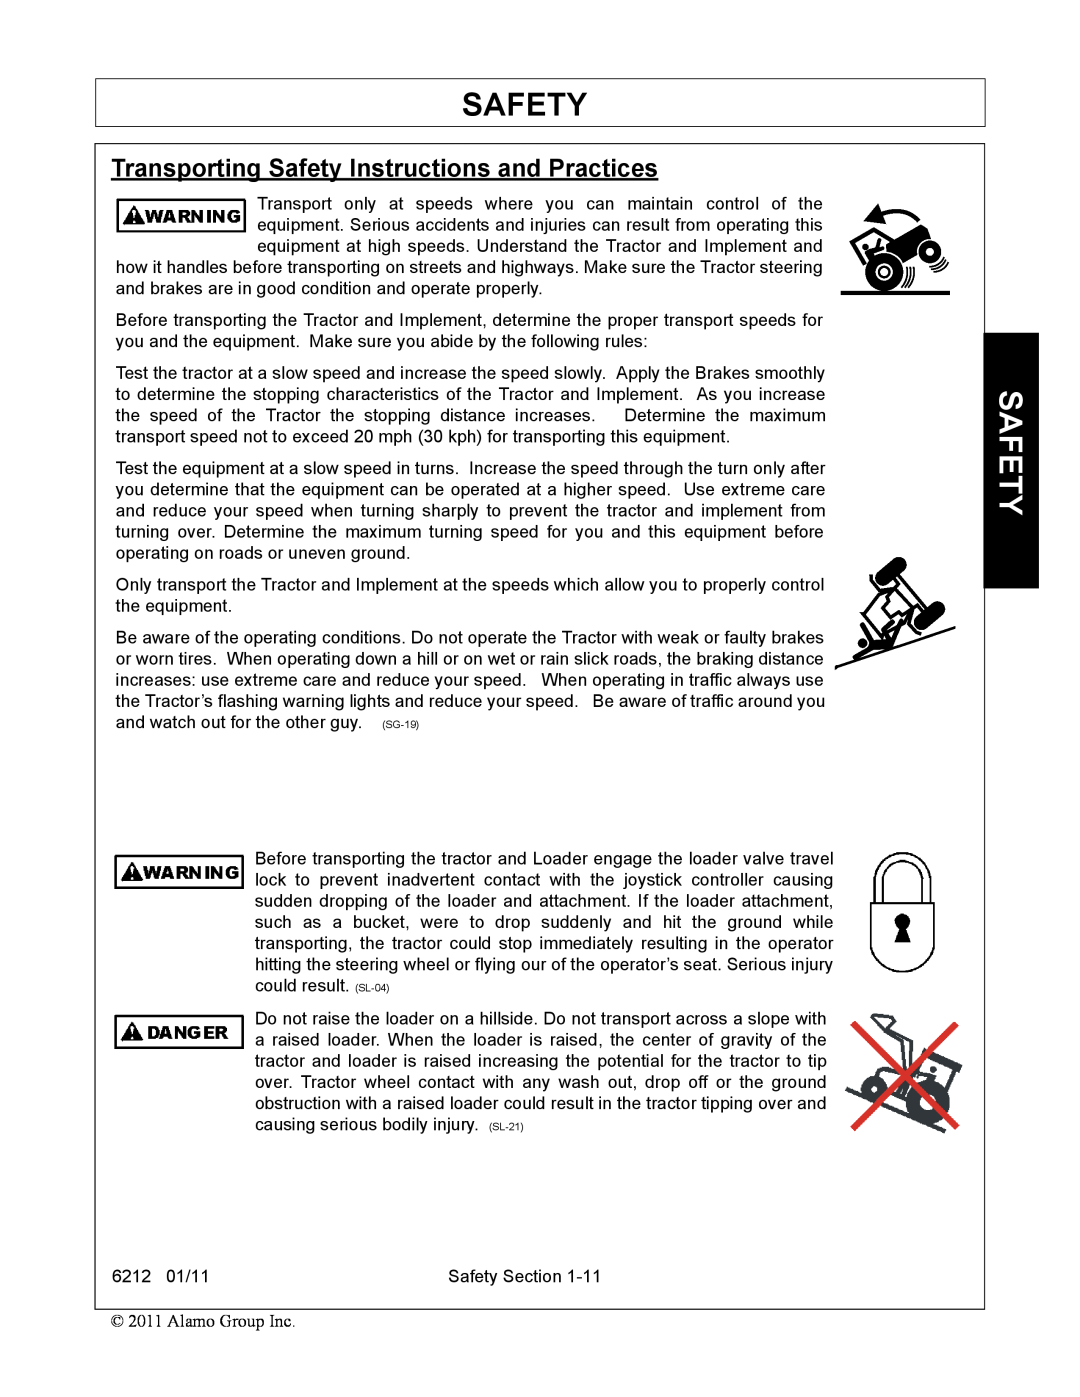 Alamo 6212 manual Transporting Safety Instructions and Practices 